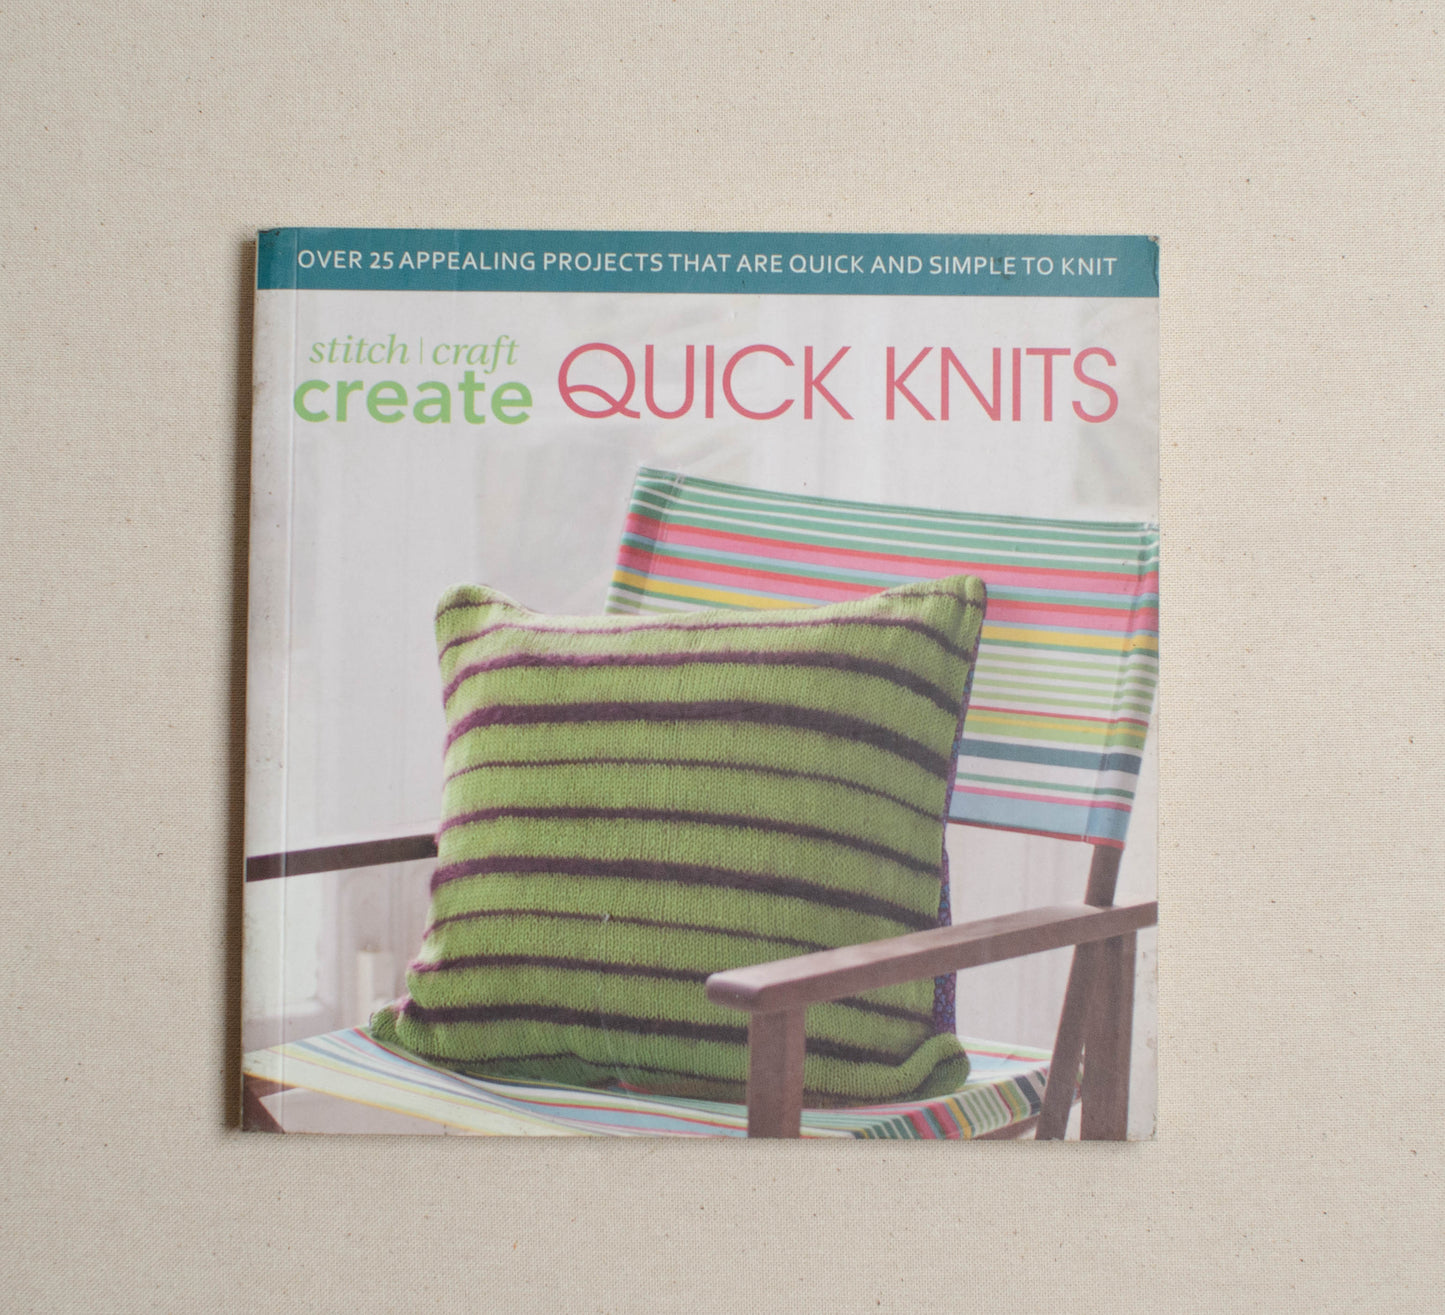 Stitch, Craft, Create Quick Knits: Over 25 Appealing Projects That Are Quick and Simple to Knit for Yourself or for Others